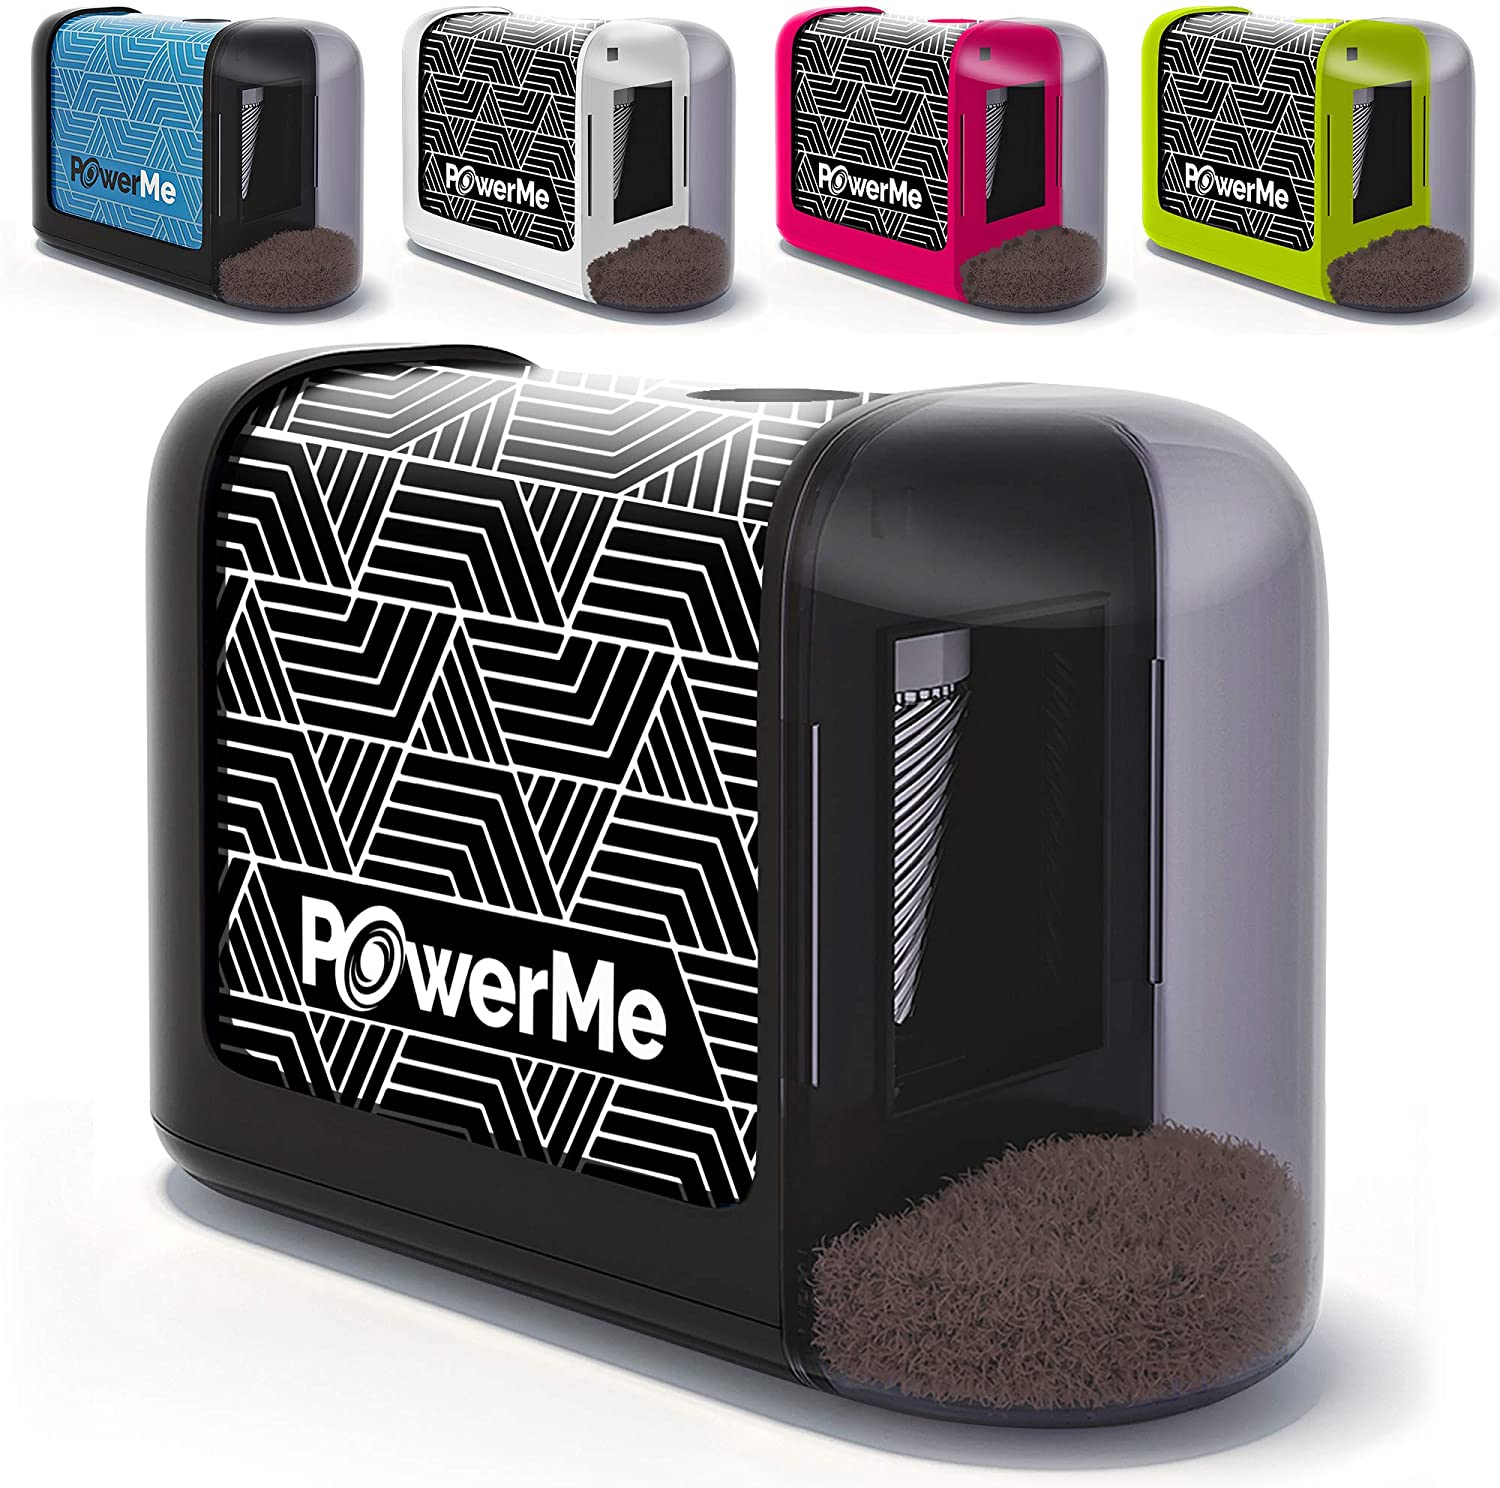 a group of different colored objects with text: 'PowerMe PowerMe PowerMe PowerMe PowerMe'